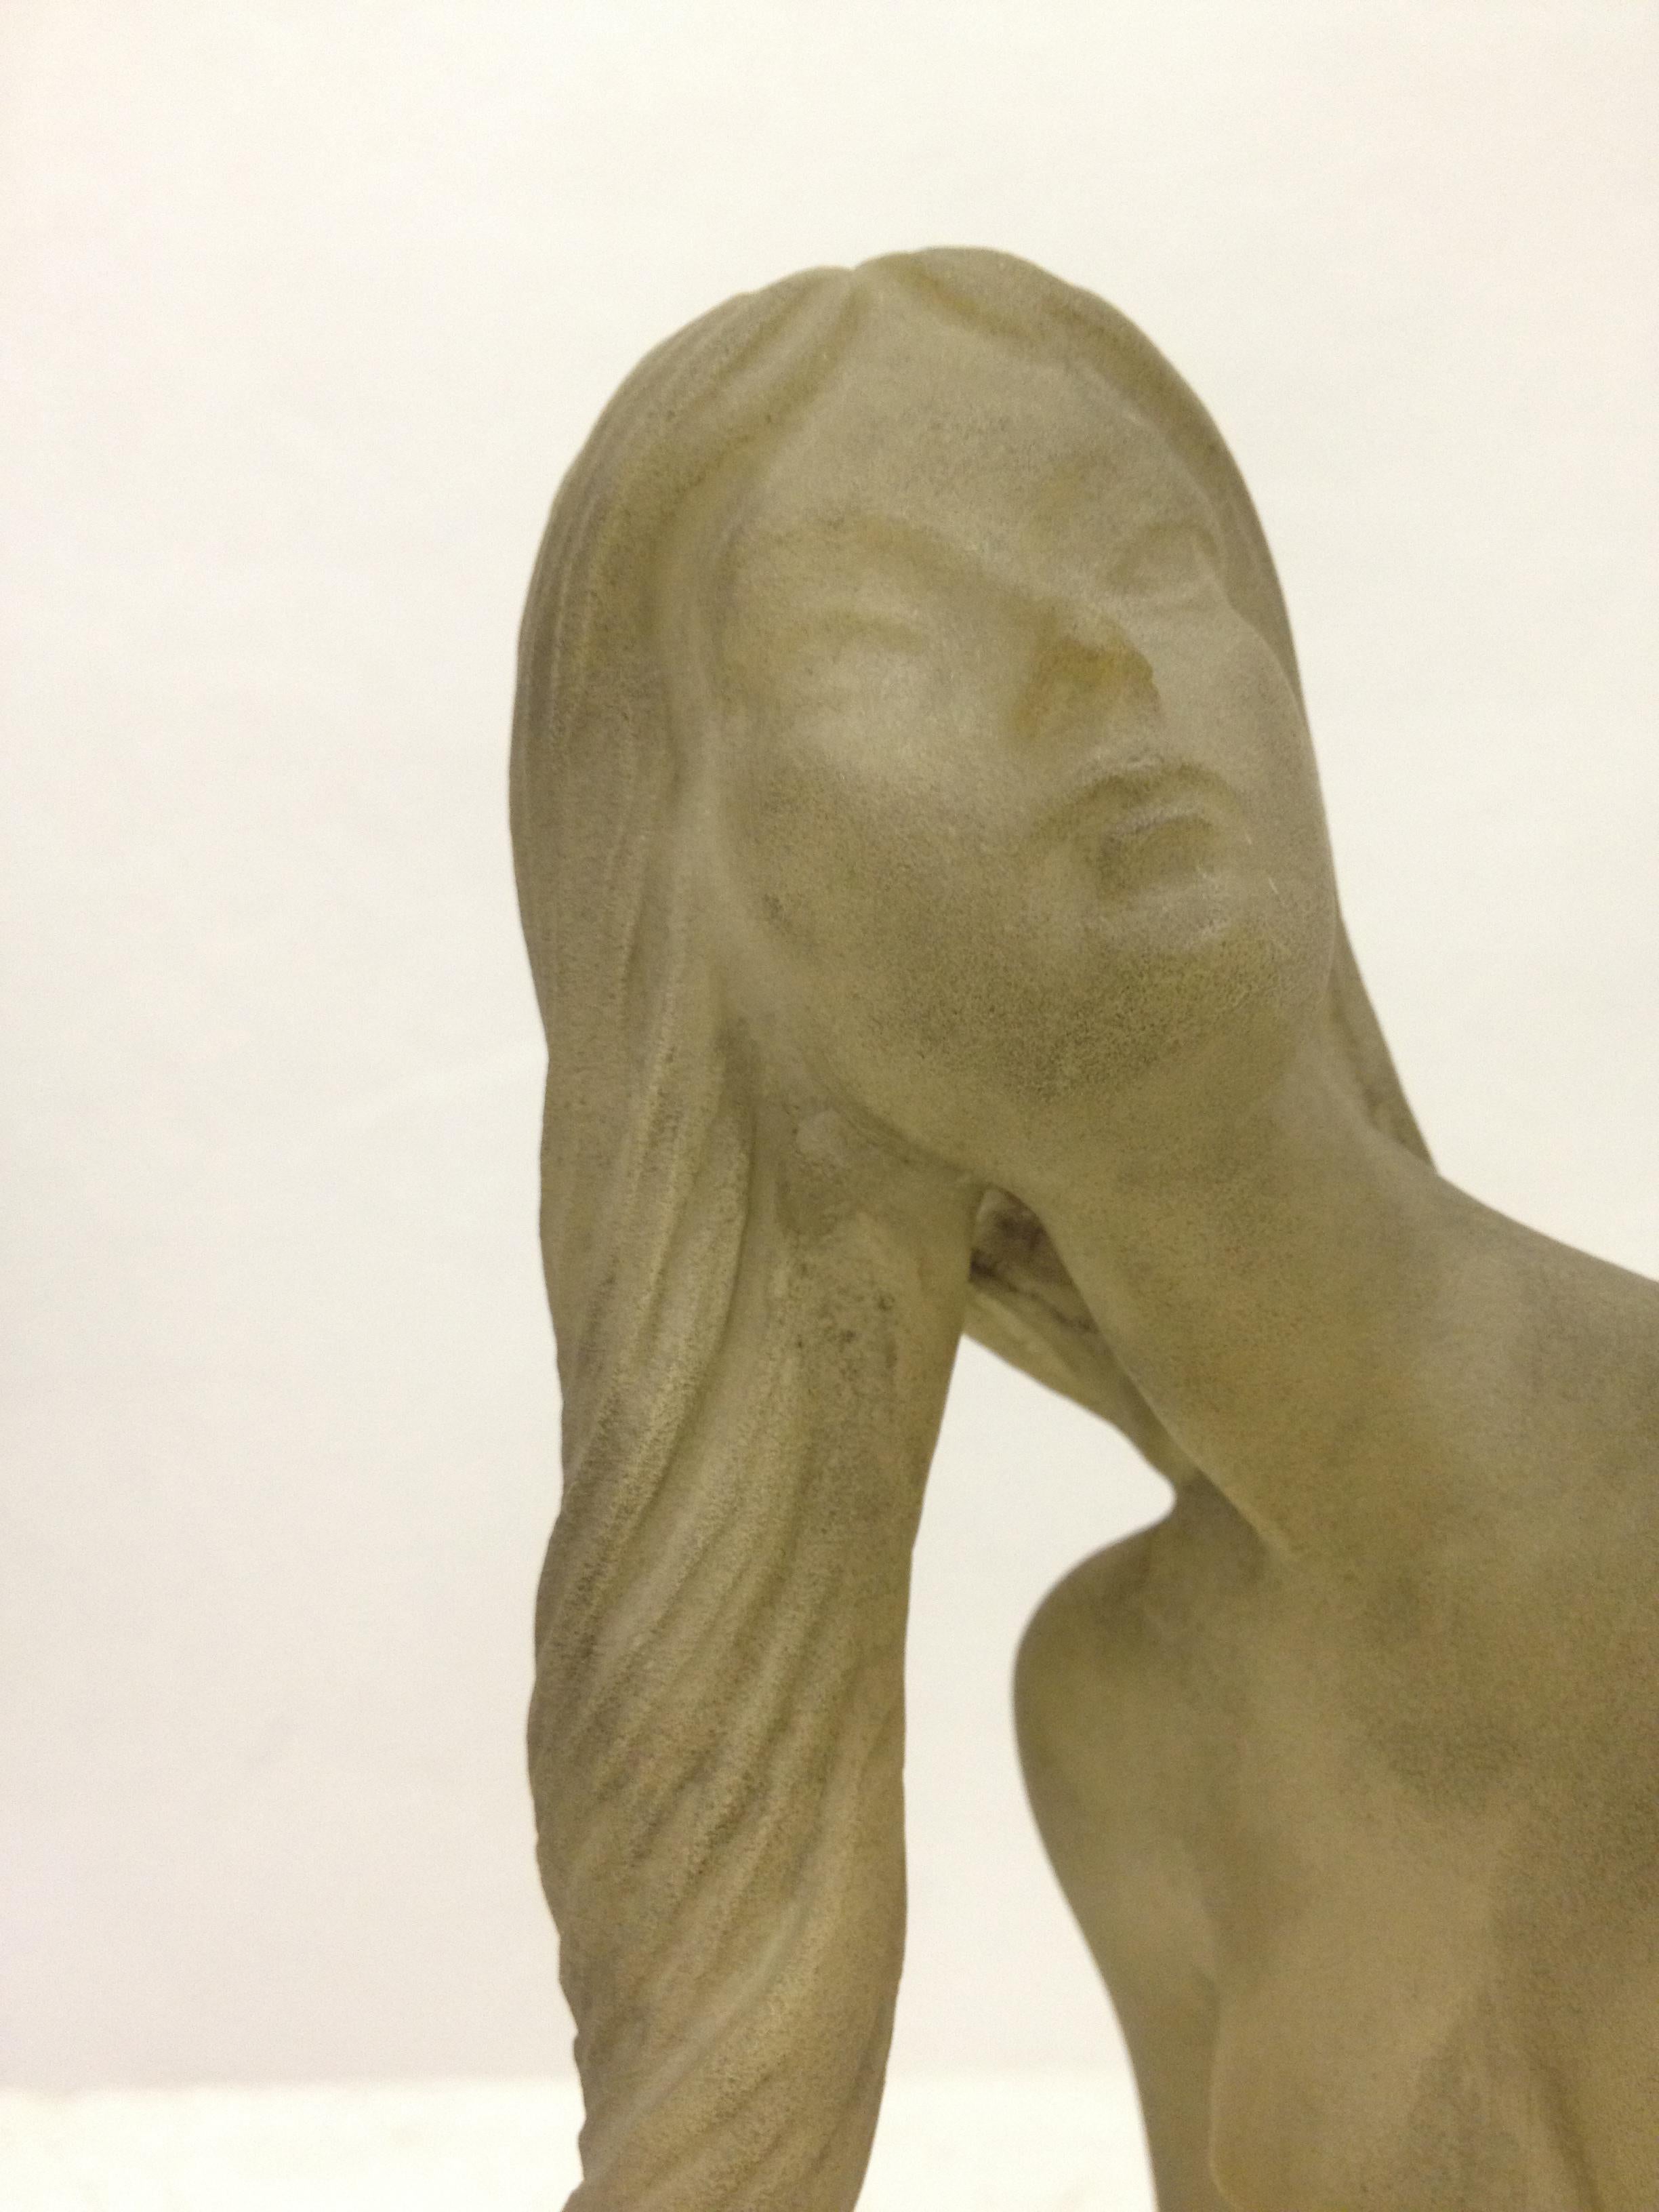 Mexican Female Nude Sculpture in Cast Resin by Dorothy C. Thorpe